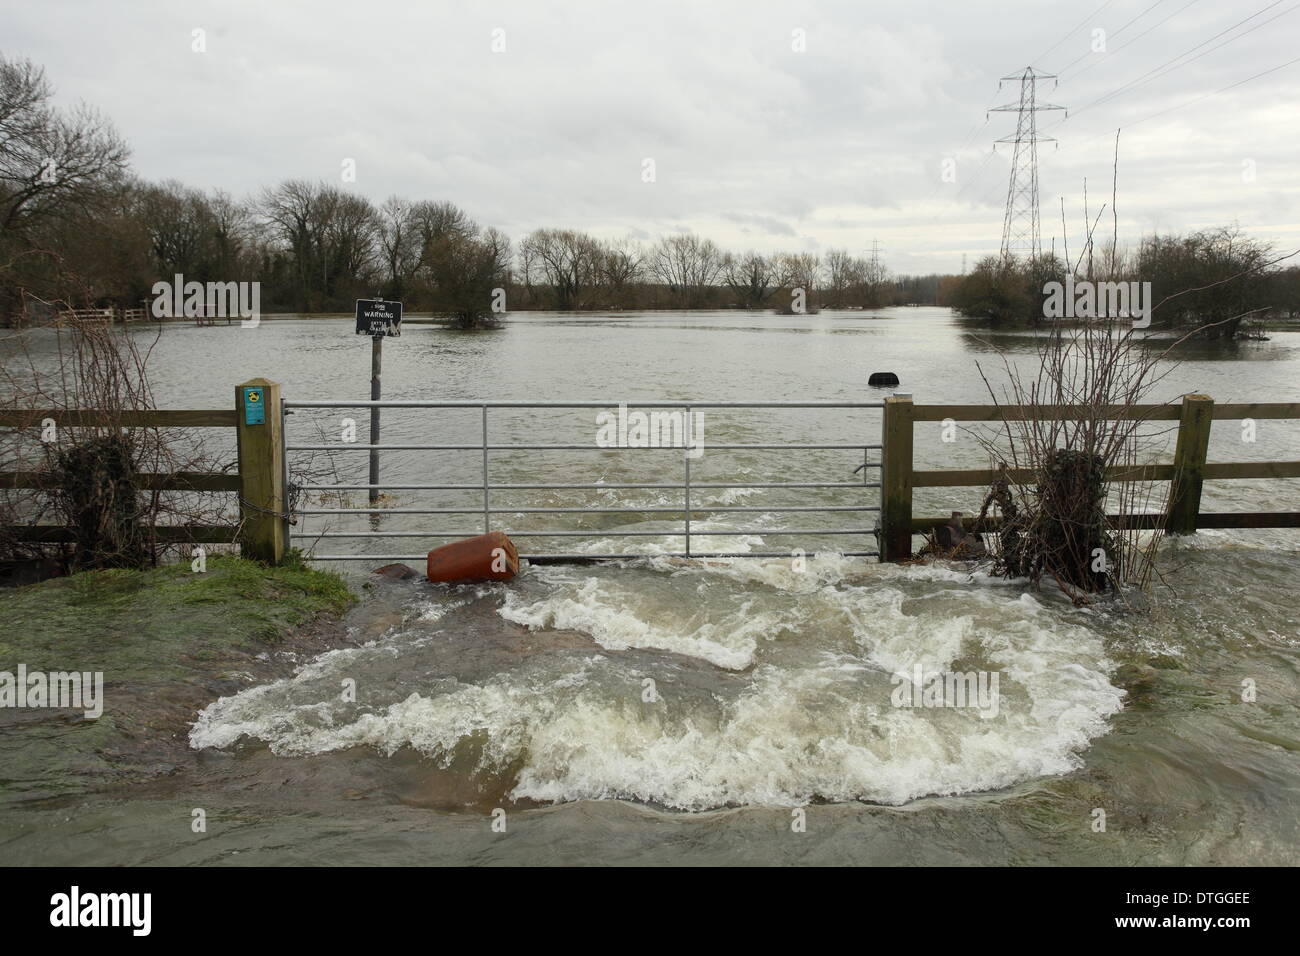 Chertsey, Thames Valley, UK. Flood waters drain from the road on to a flood plain bordering the Thames river. Stock Photo